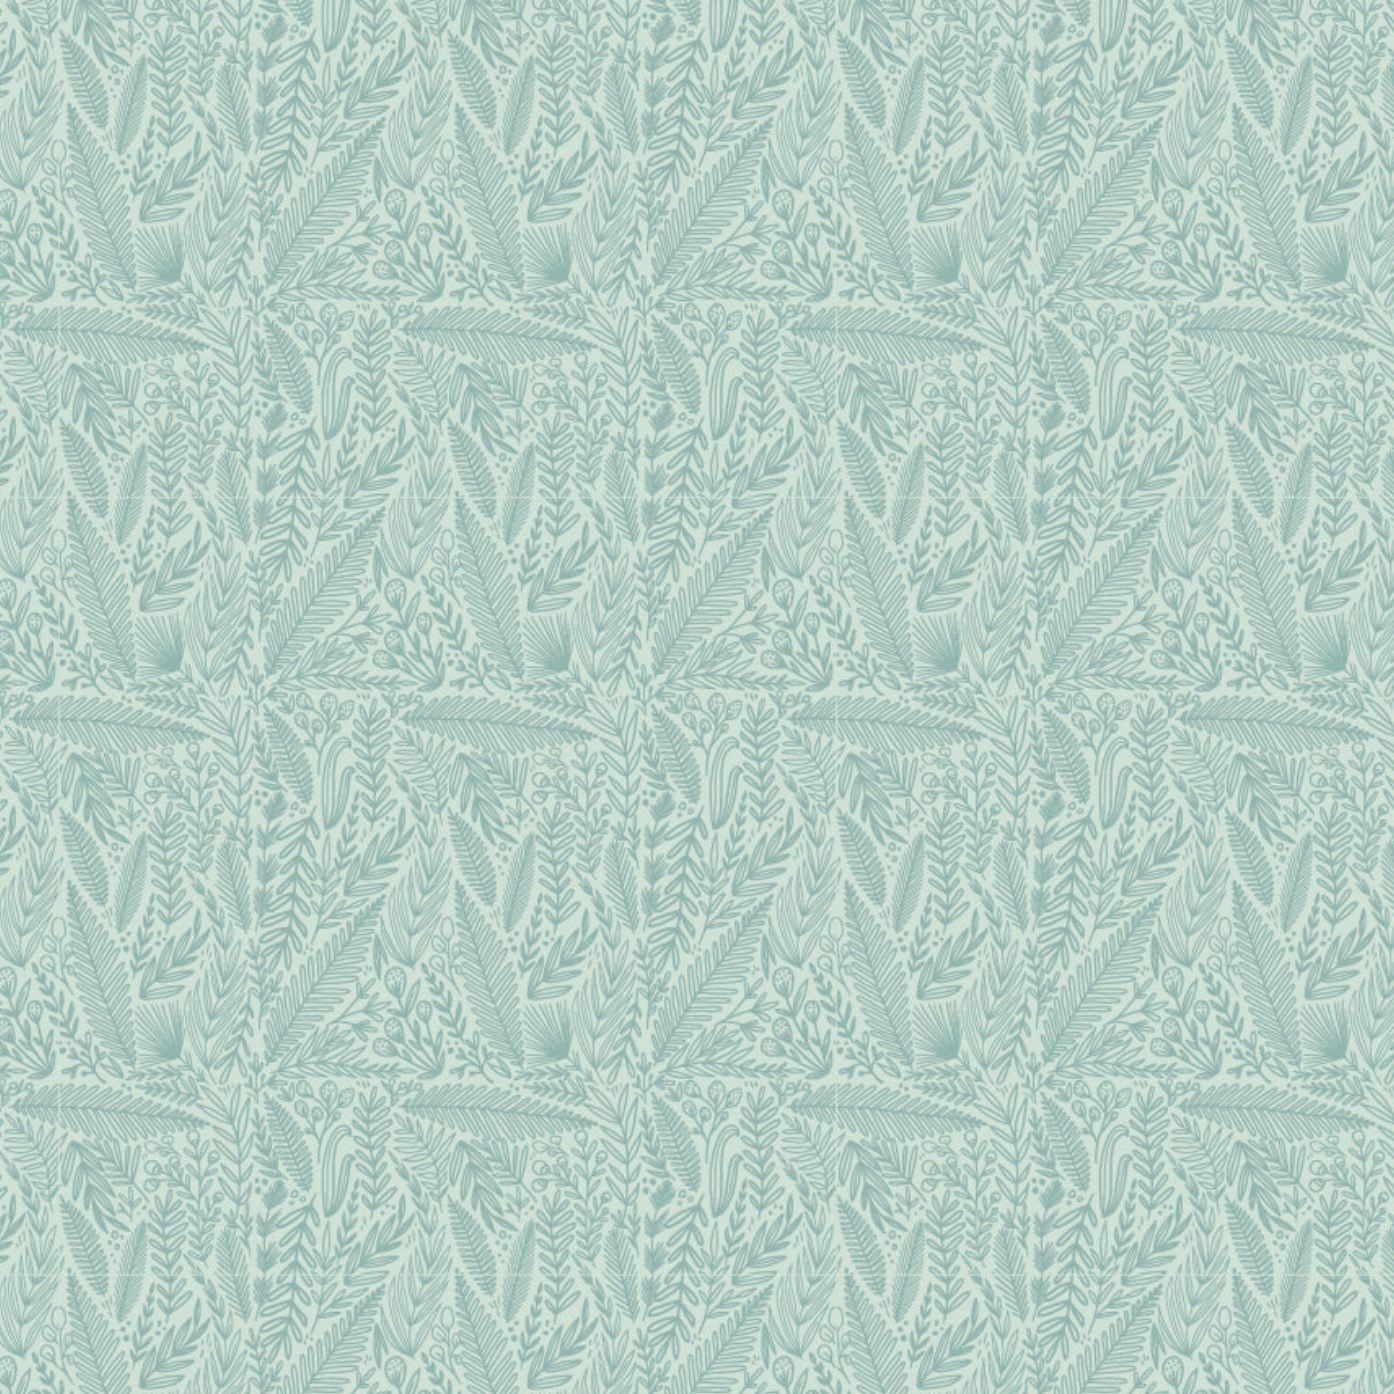 Cottage Charm, Delicate Foliage Blue, CH24755, sold by the 1/2 yard, *PREORDER